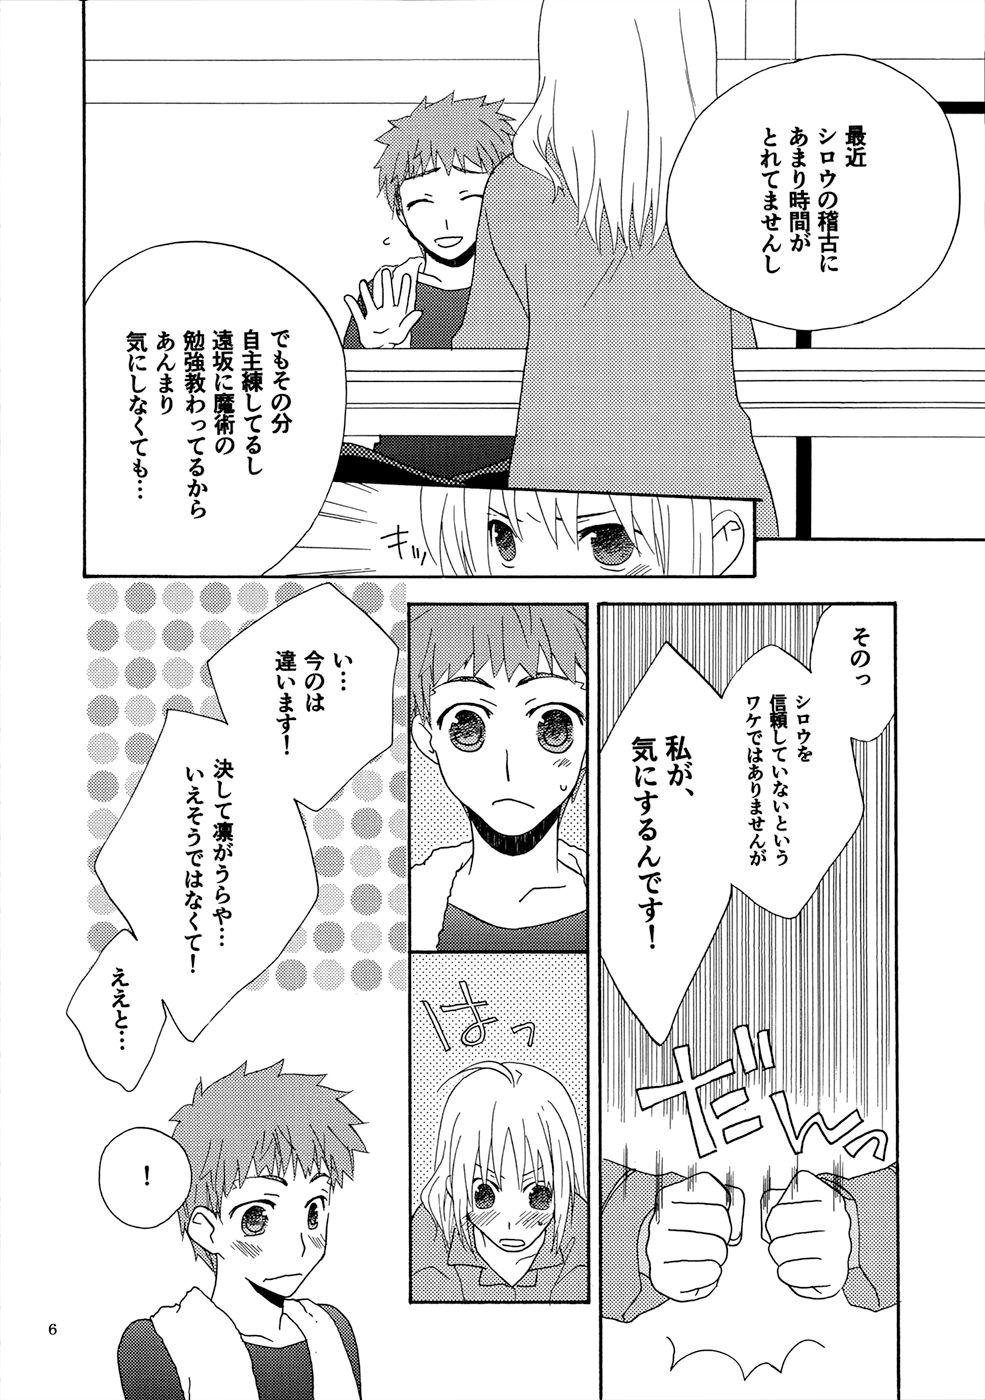 Large POP STAR - Fate stay night Asstomouth - Page 5